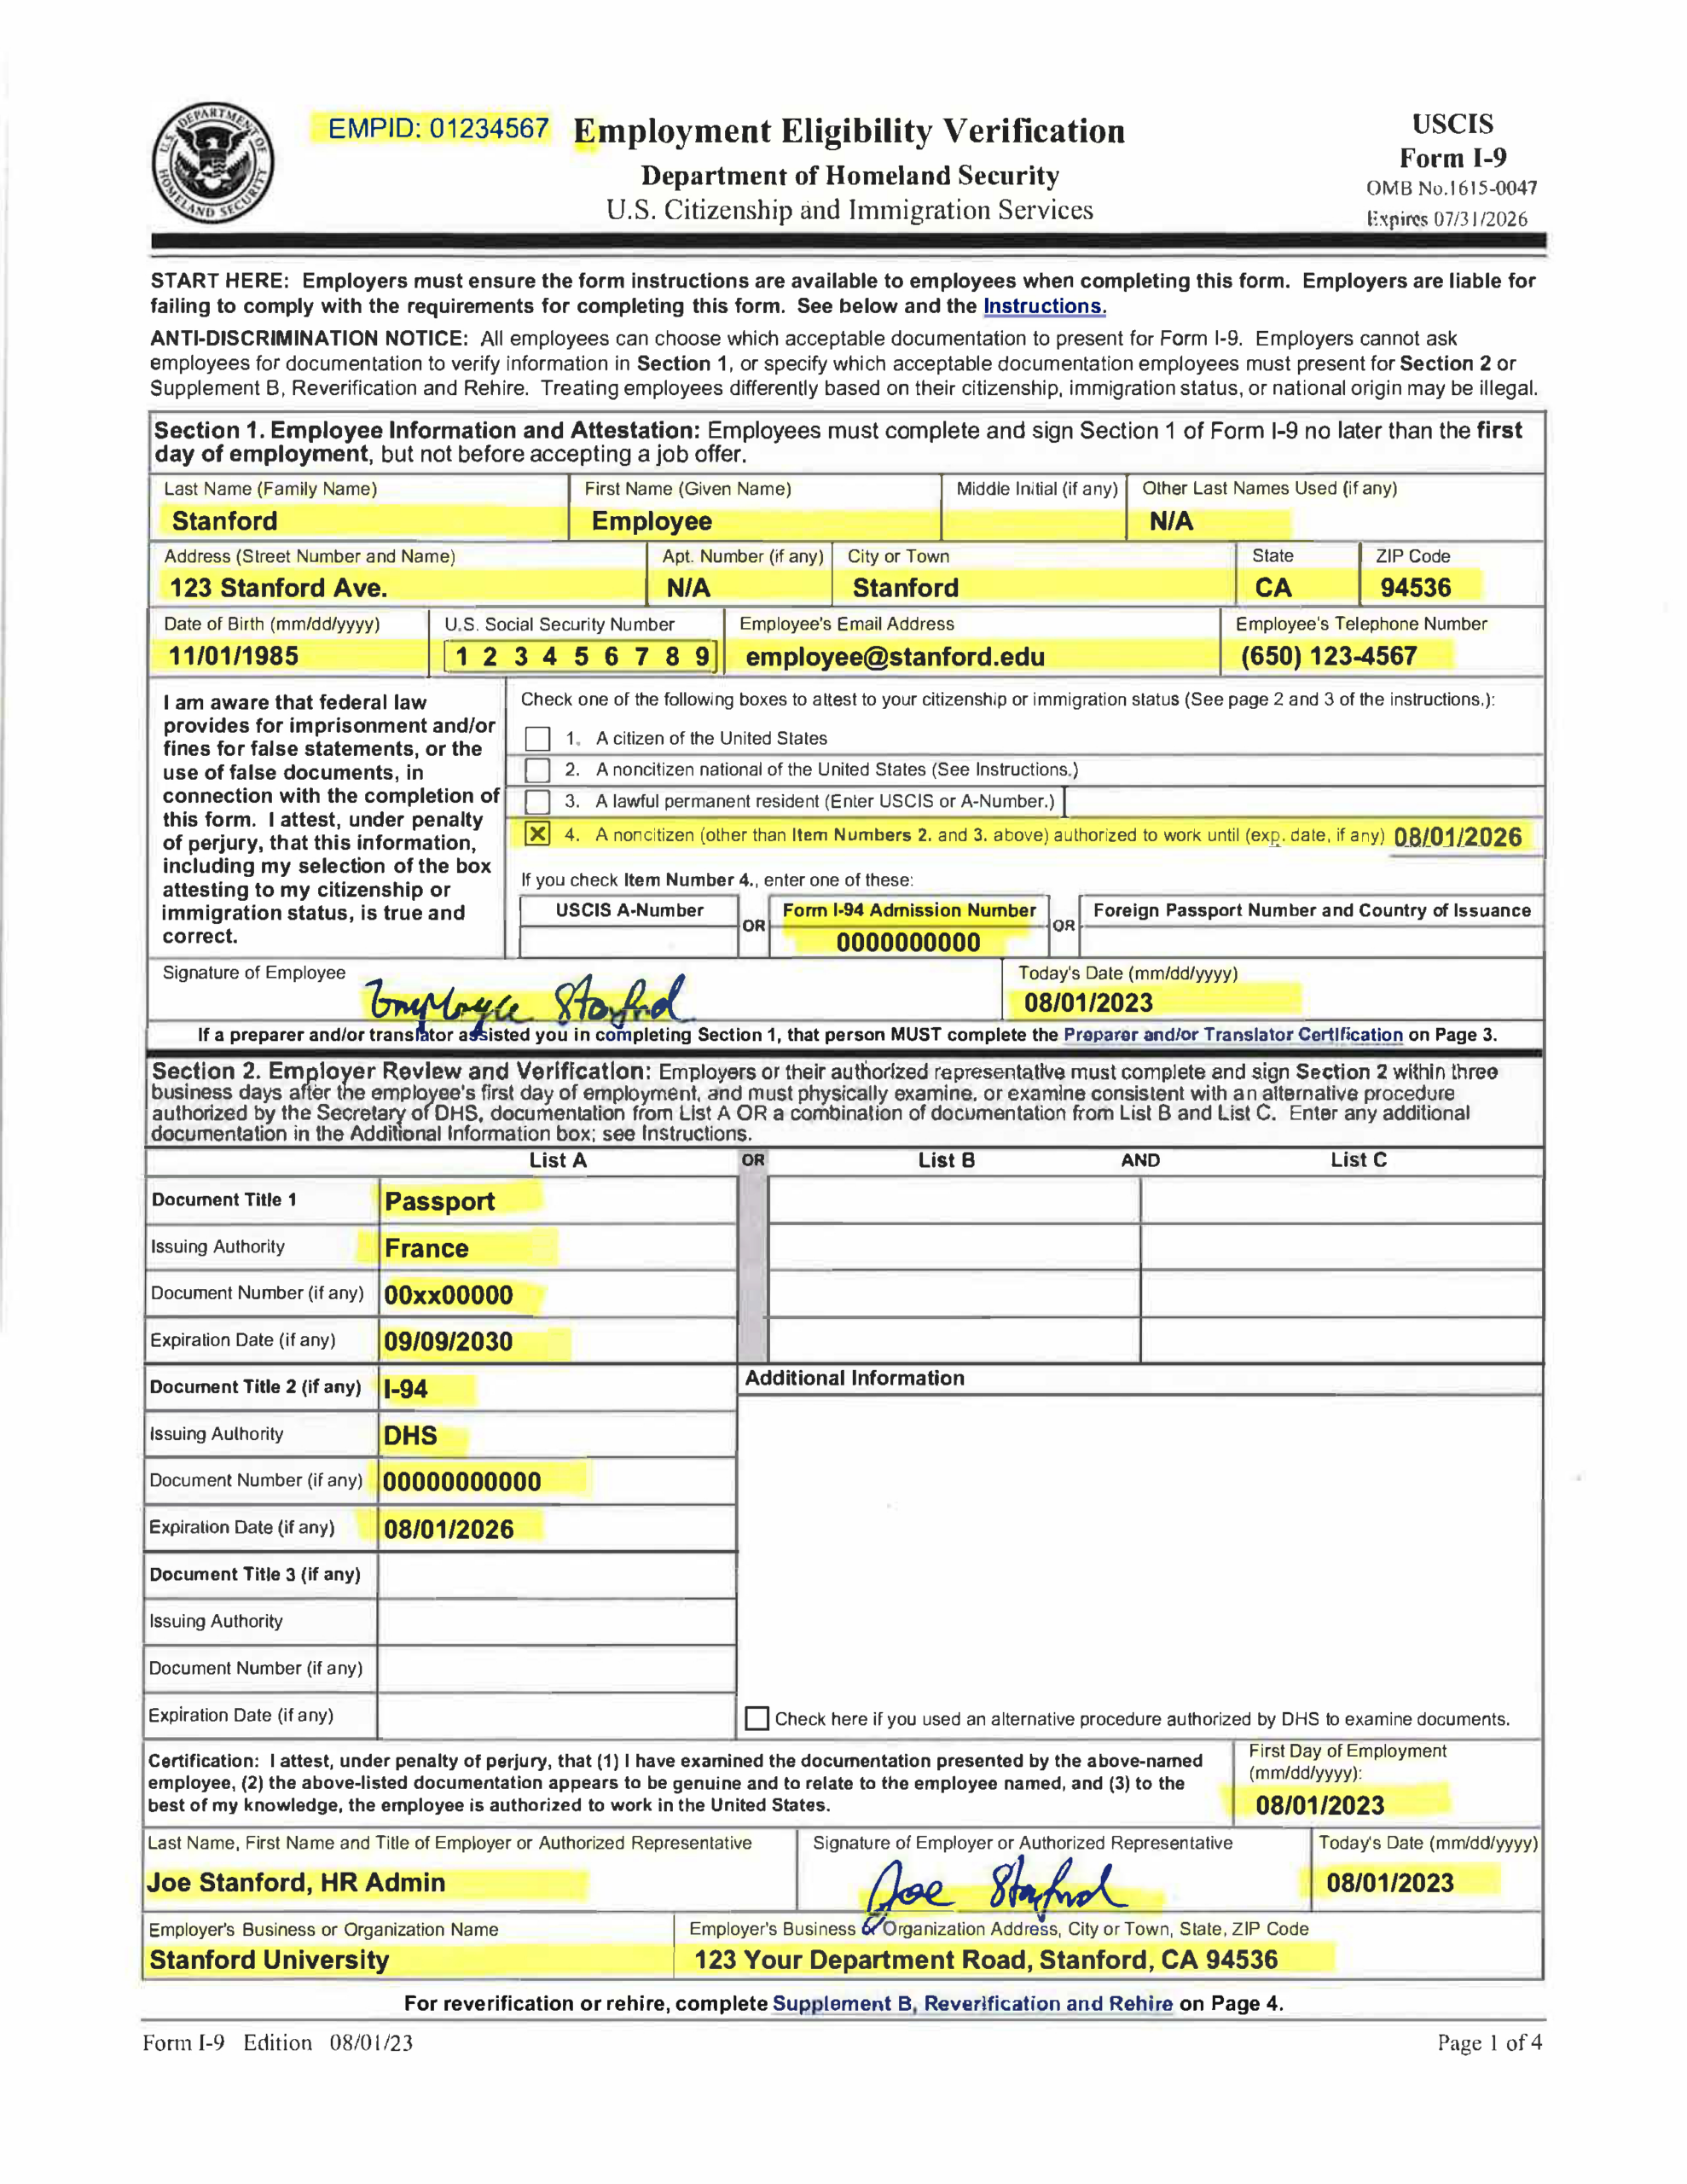 Examples Of Completed Form I-9 For Stanford within USCIS I9 Form Documents